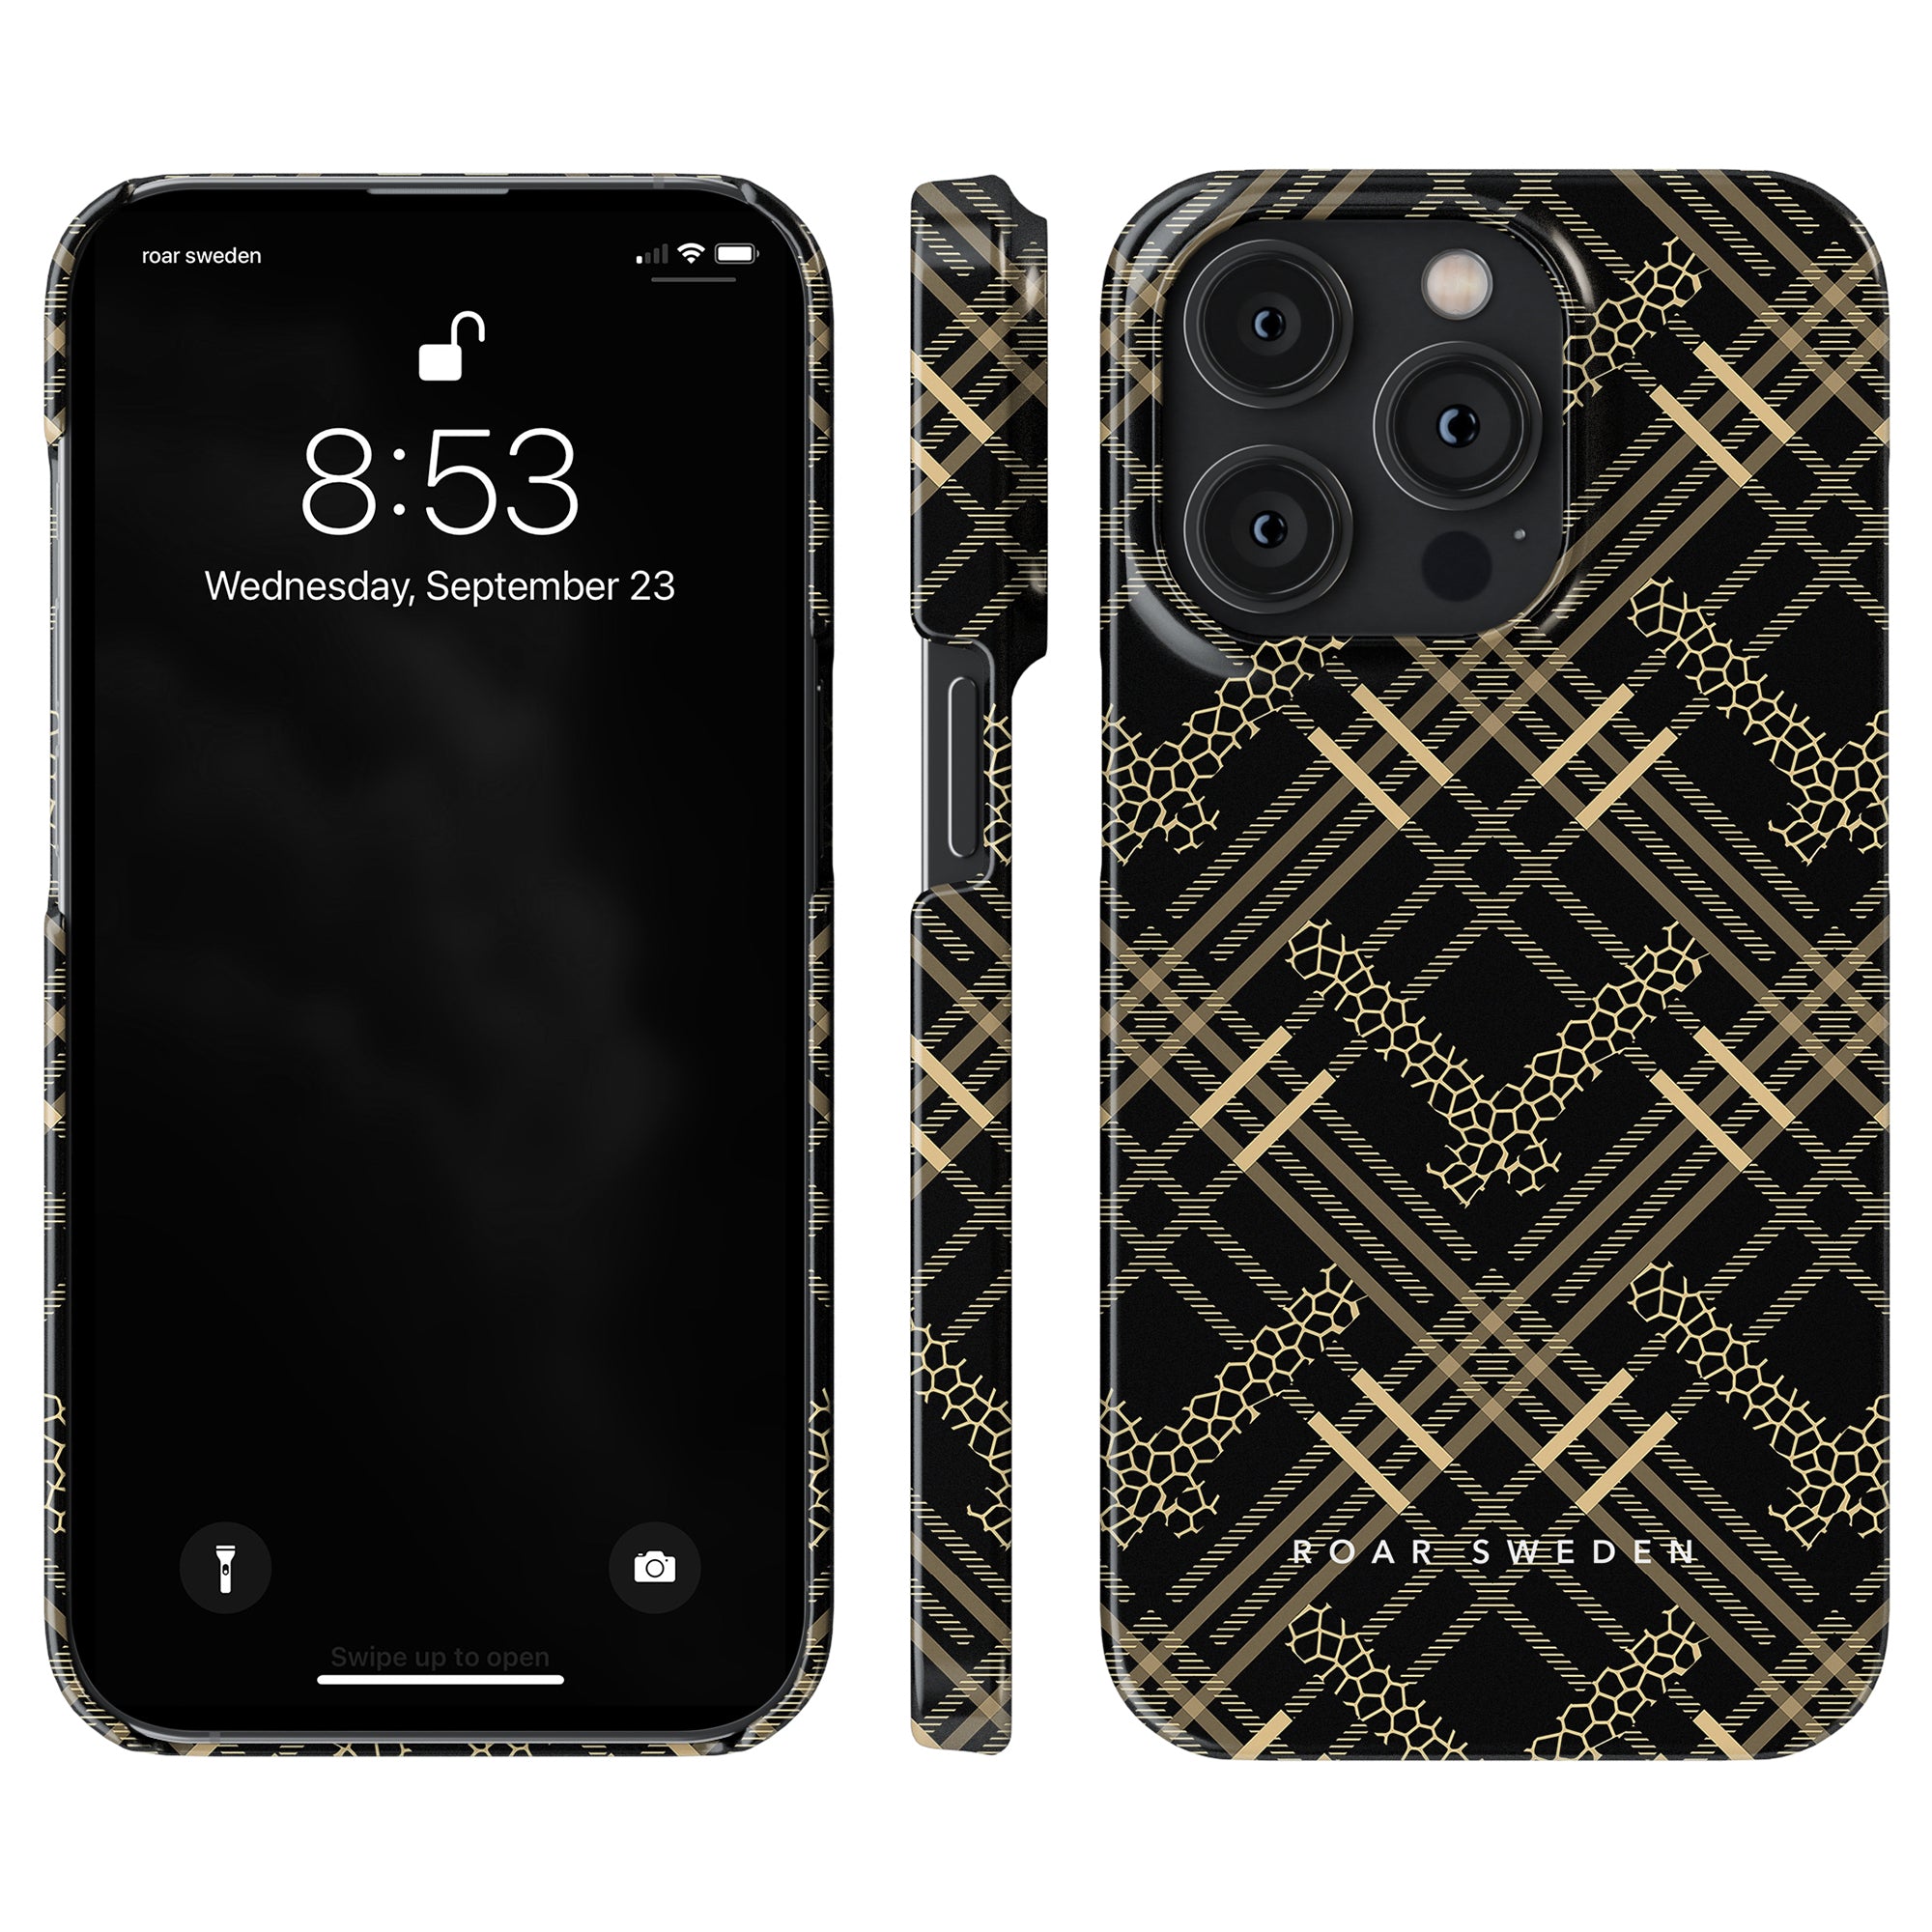 The Tartan Leo - Slim case is a stylish black and gold plaid pattern case designed specifically for the iPhone 11 Pro. Made by Roar Sweden, this sleek smartphone accessory adds a touch.